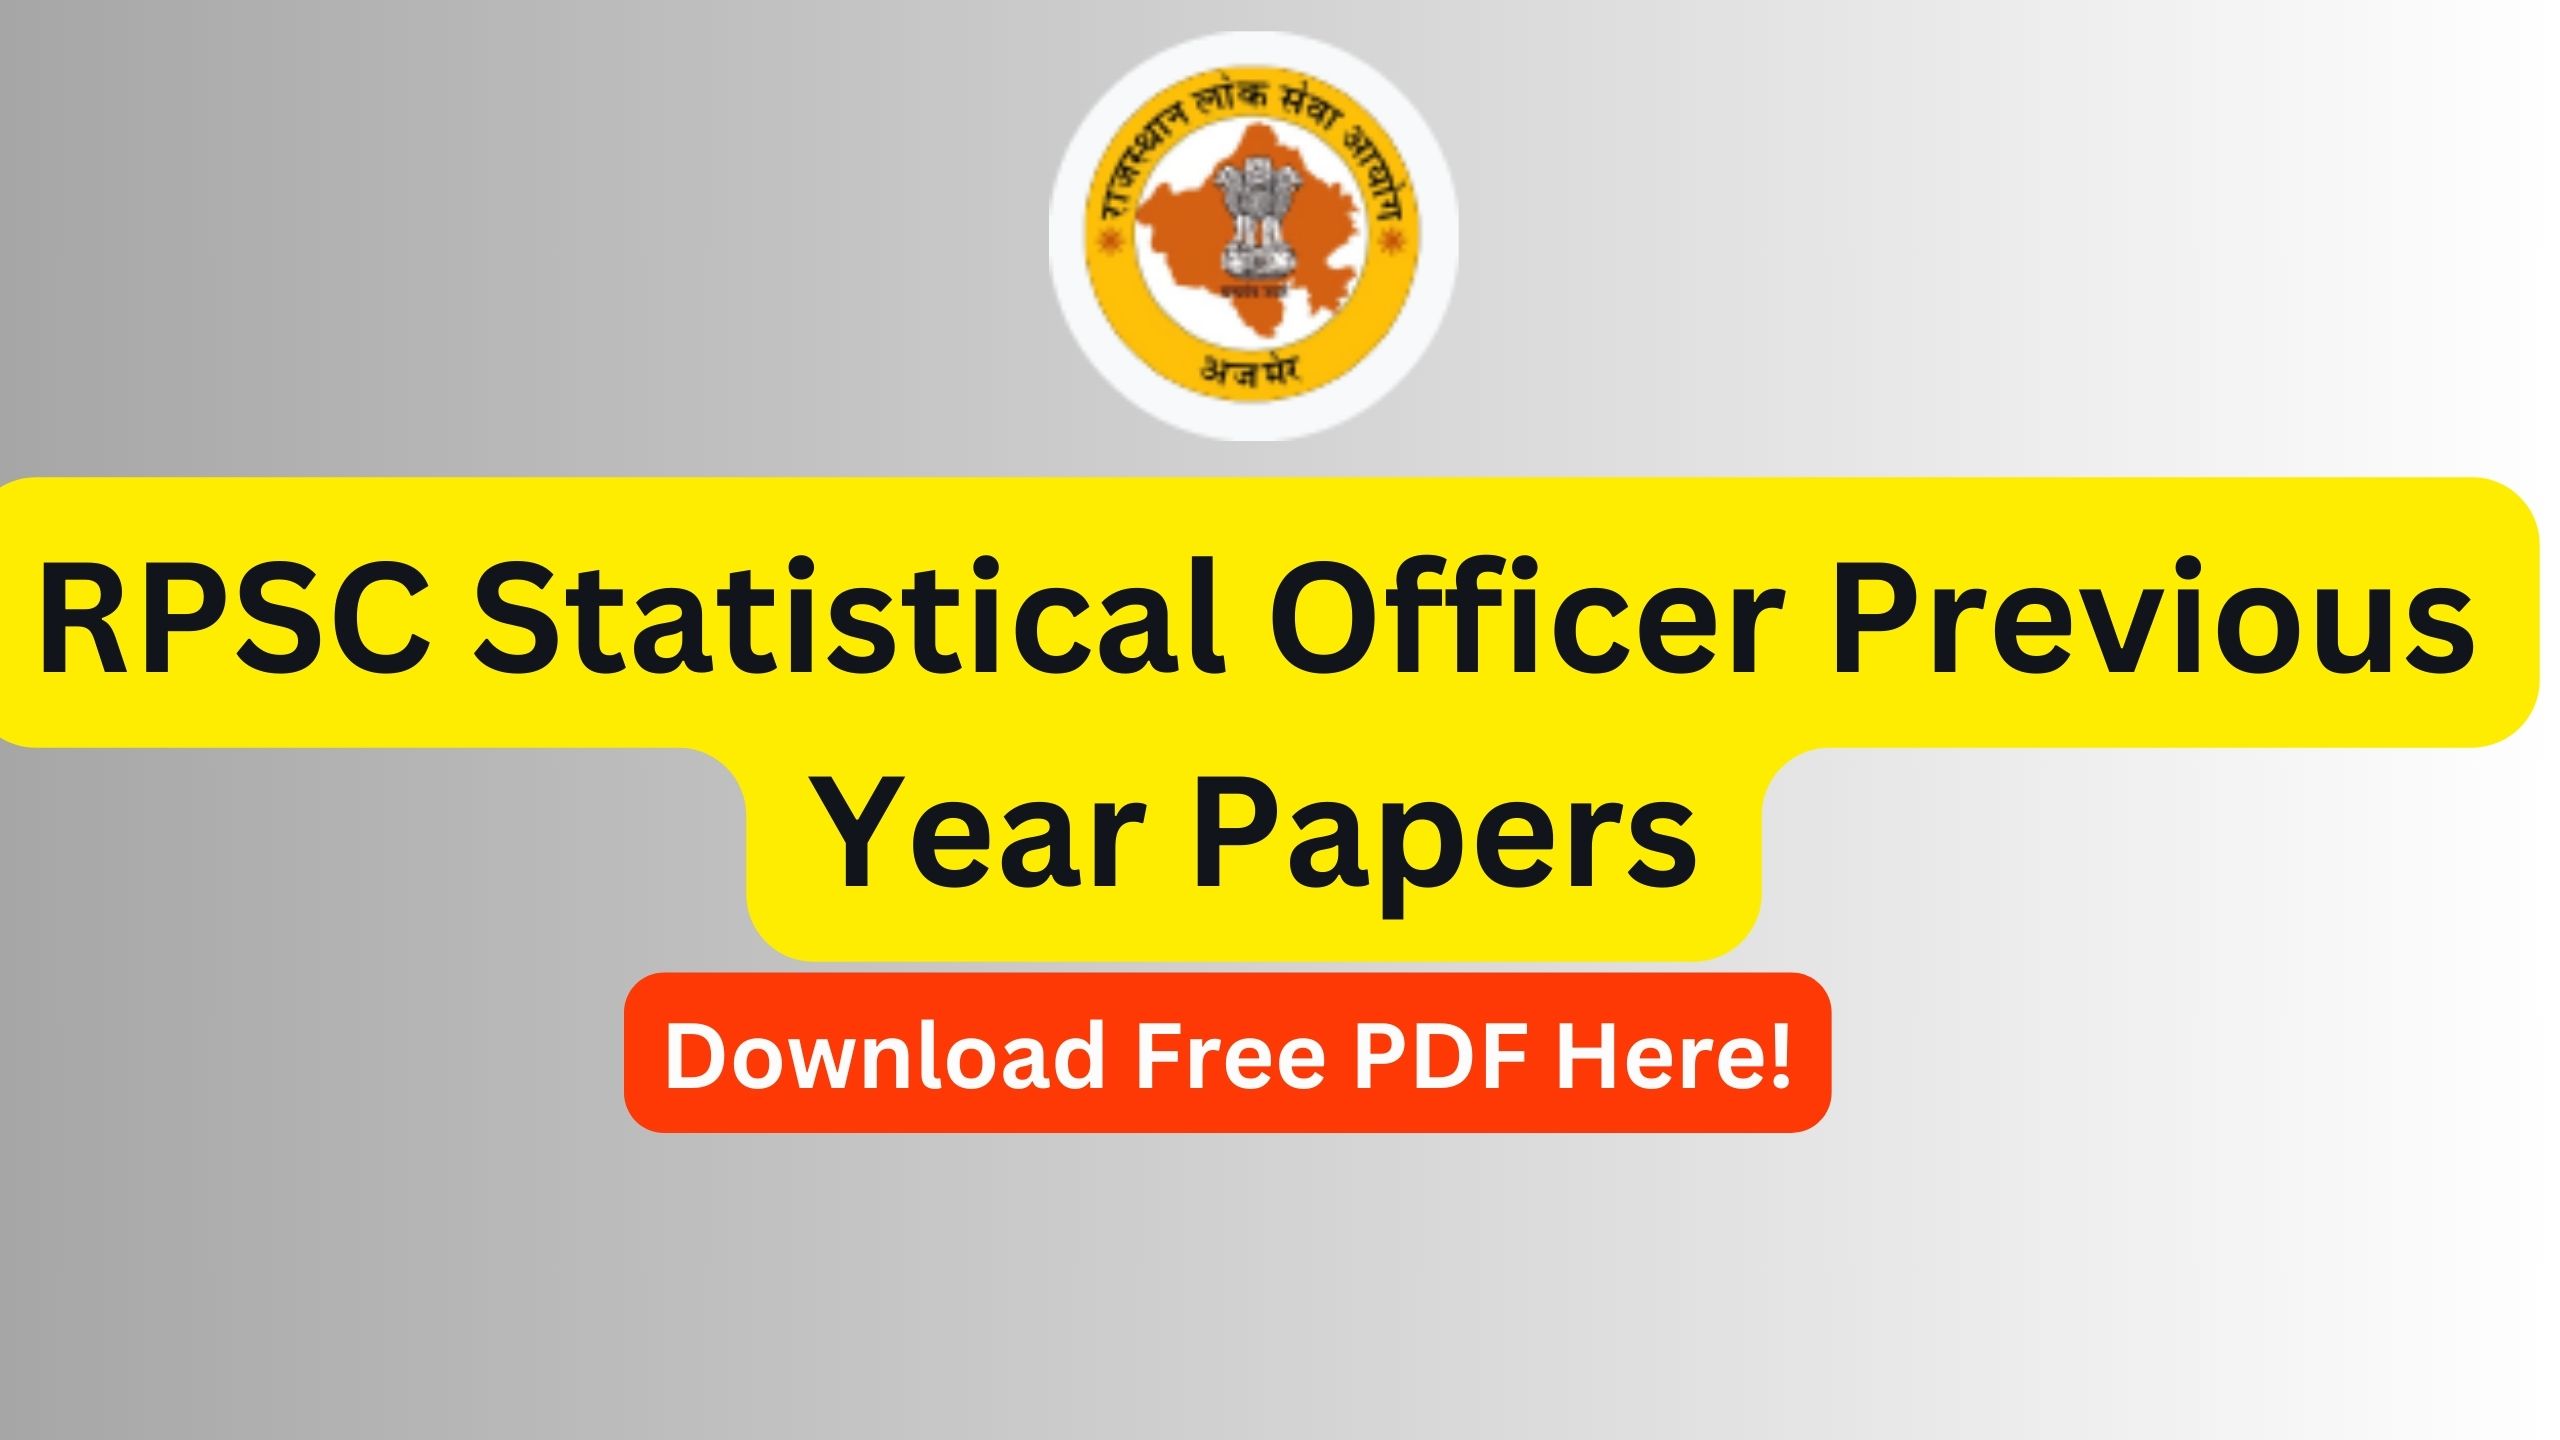 RPSC Statistical Officer Previous Year Papers